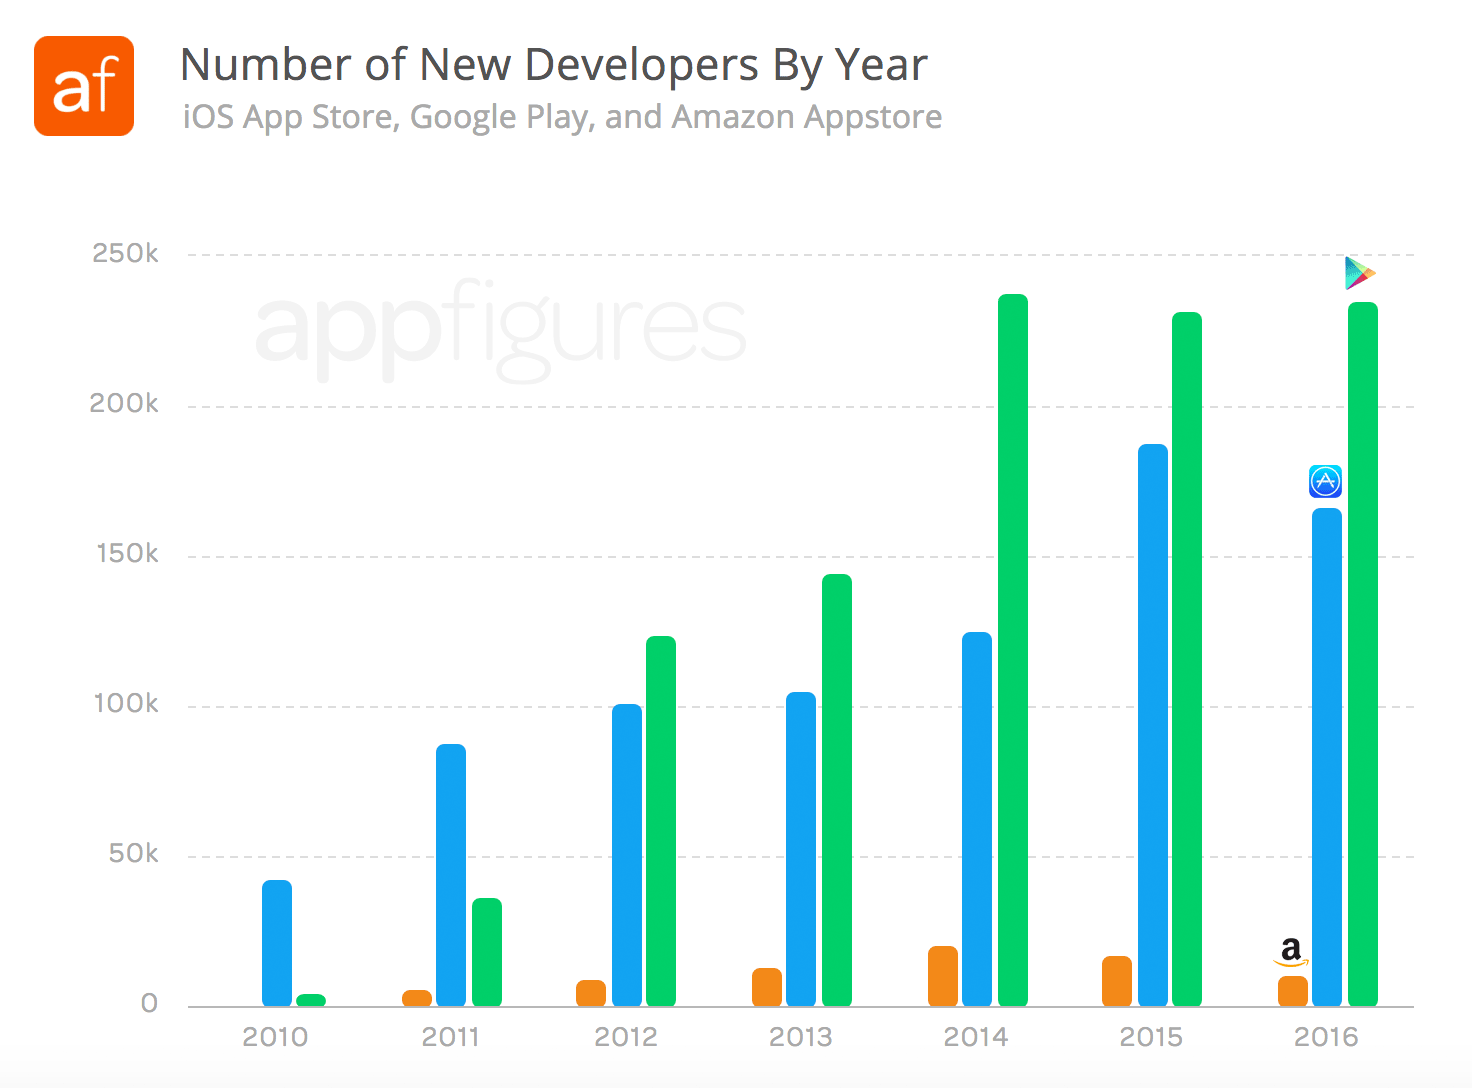 Number of new developers starting to release app by year on the iOS App Store and Google Play